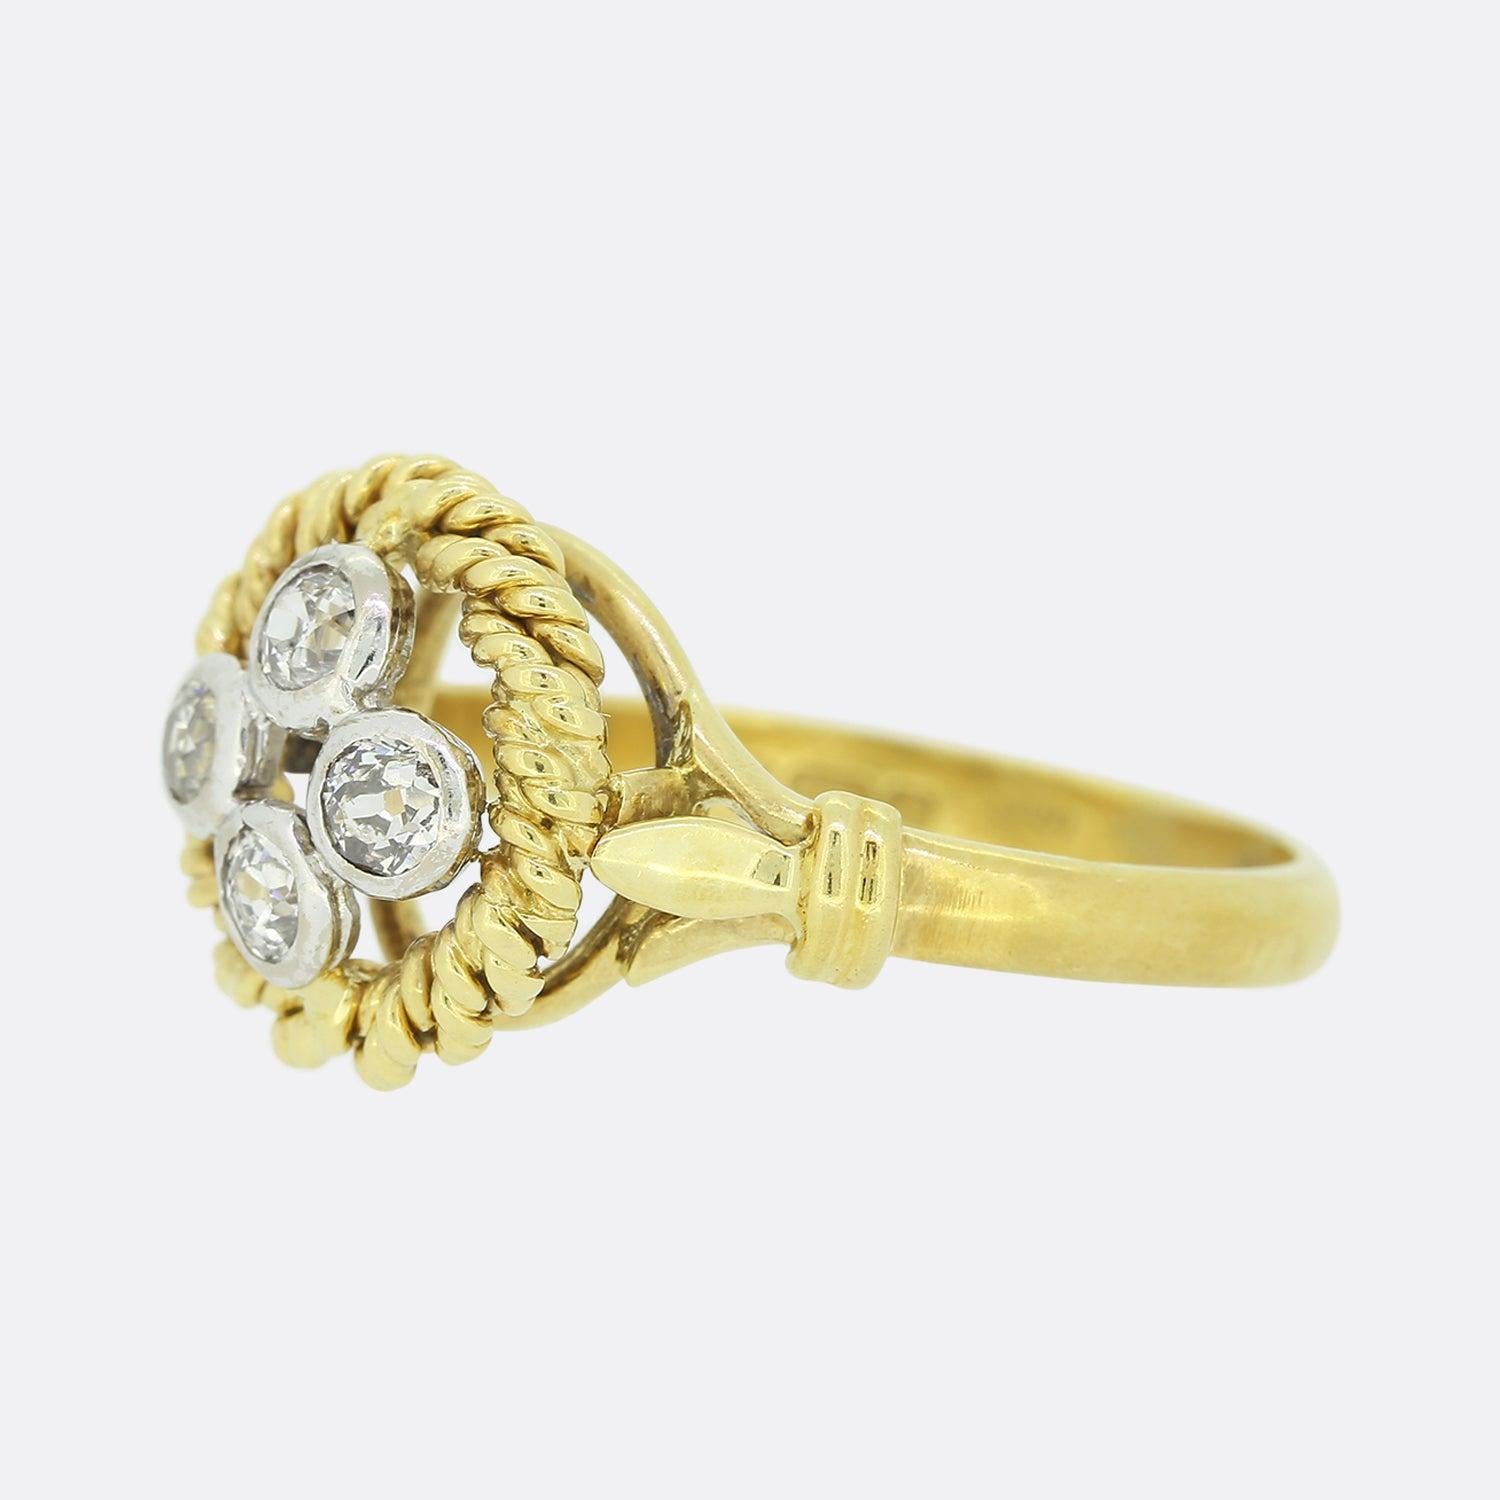 This is a vintage 18ct yellow gold diamond ring. The piece offers a quartet of old cut diamonds, each individually rub-over set in white gold at the centre of an open face. These focal stones are surrounded by a roped boarder which circulates the